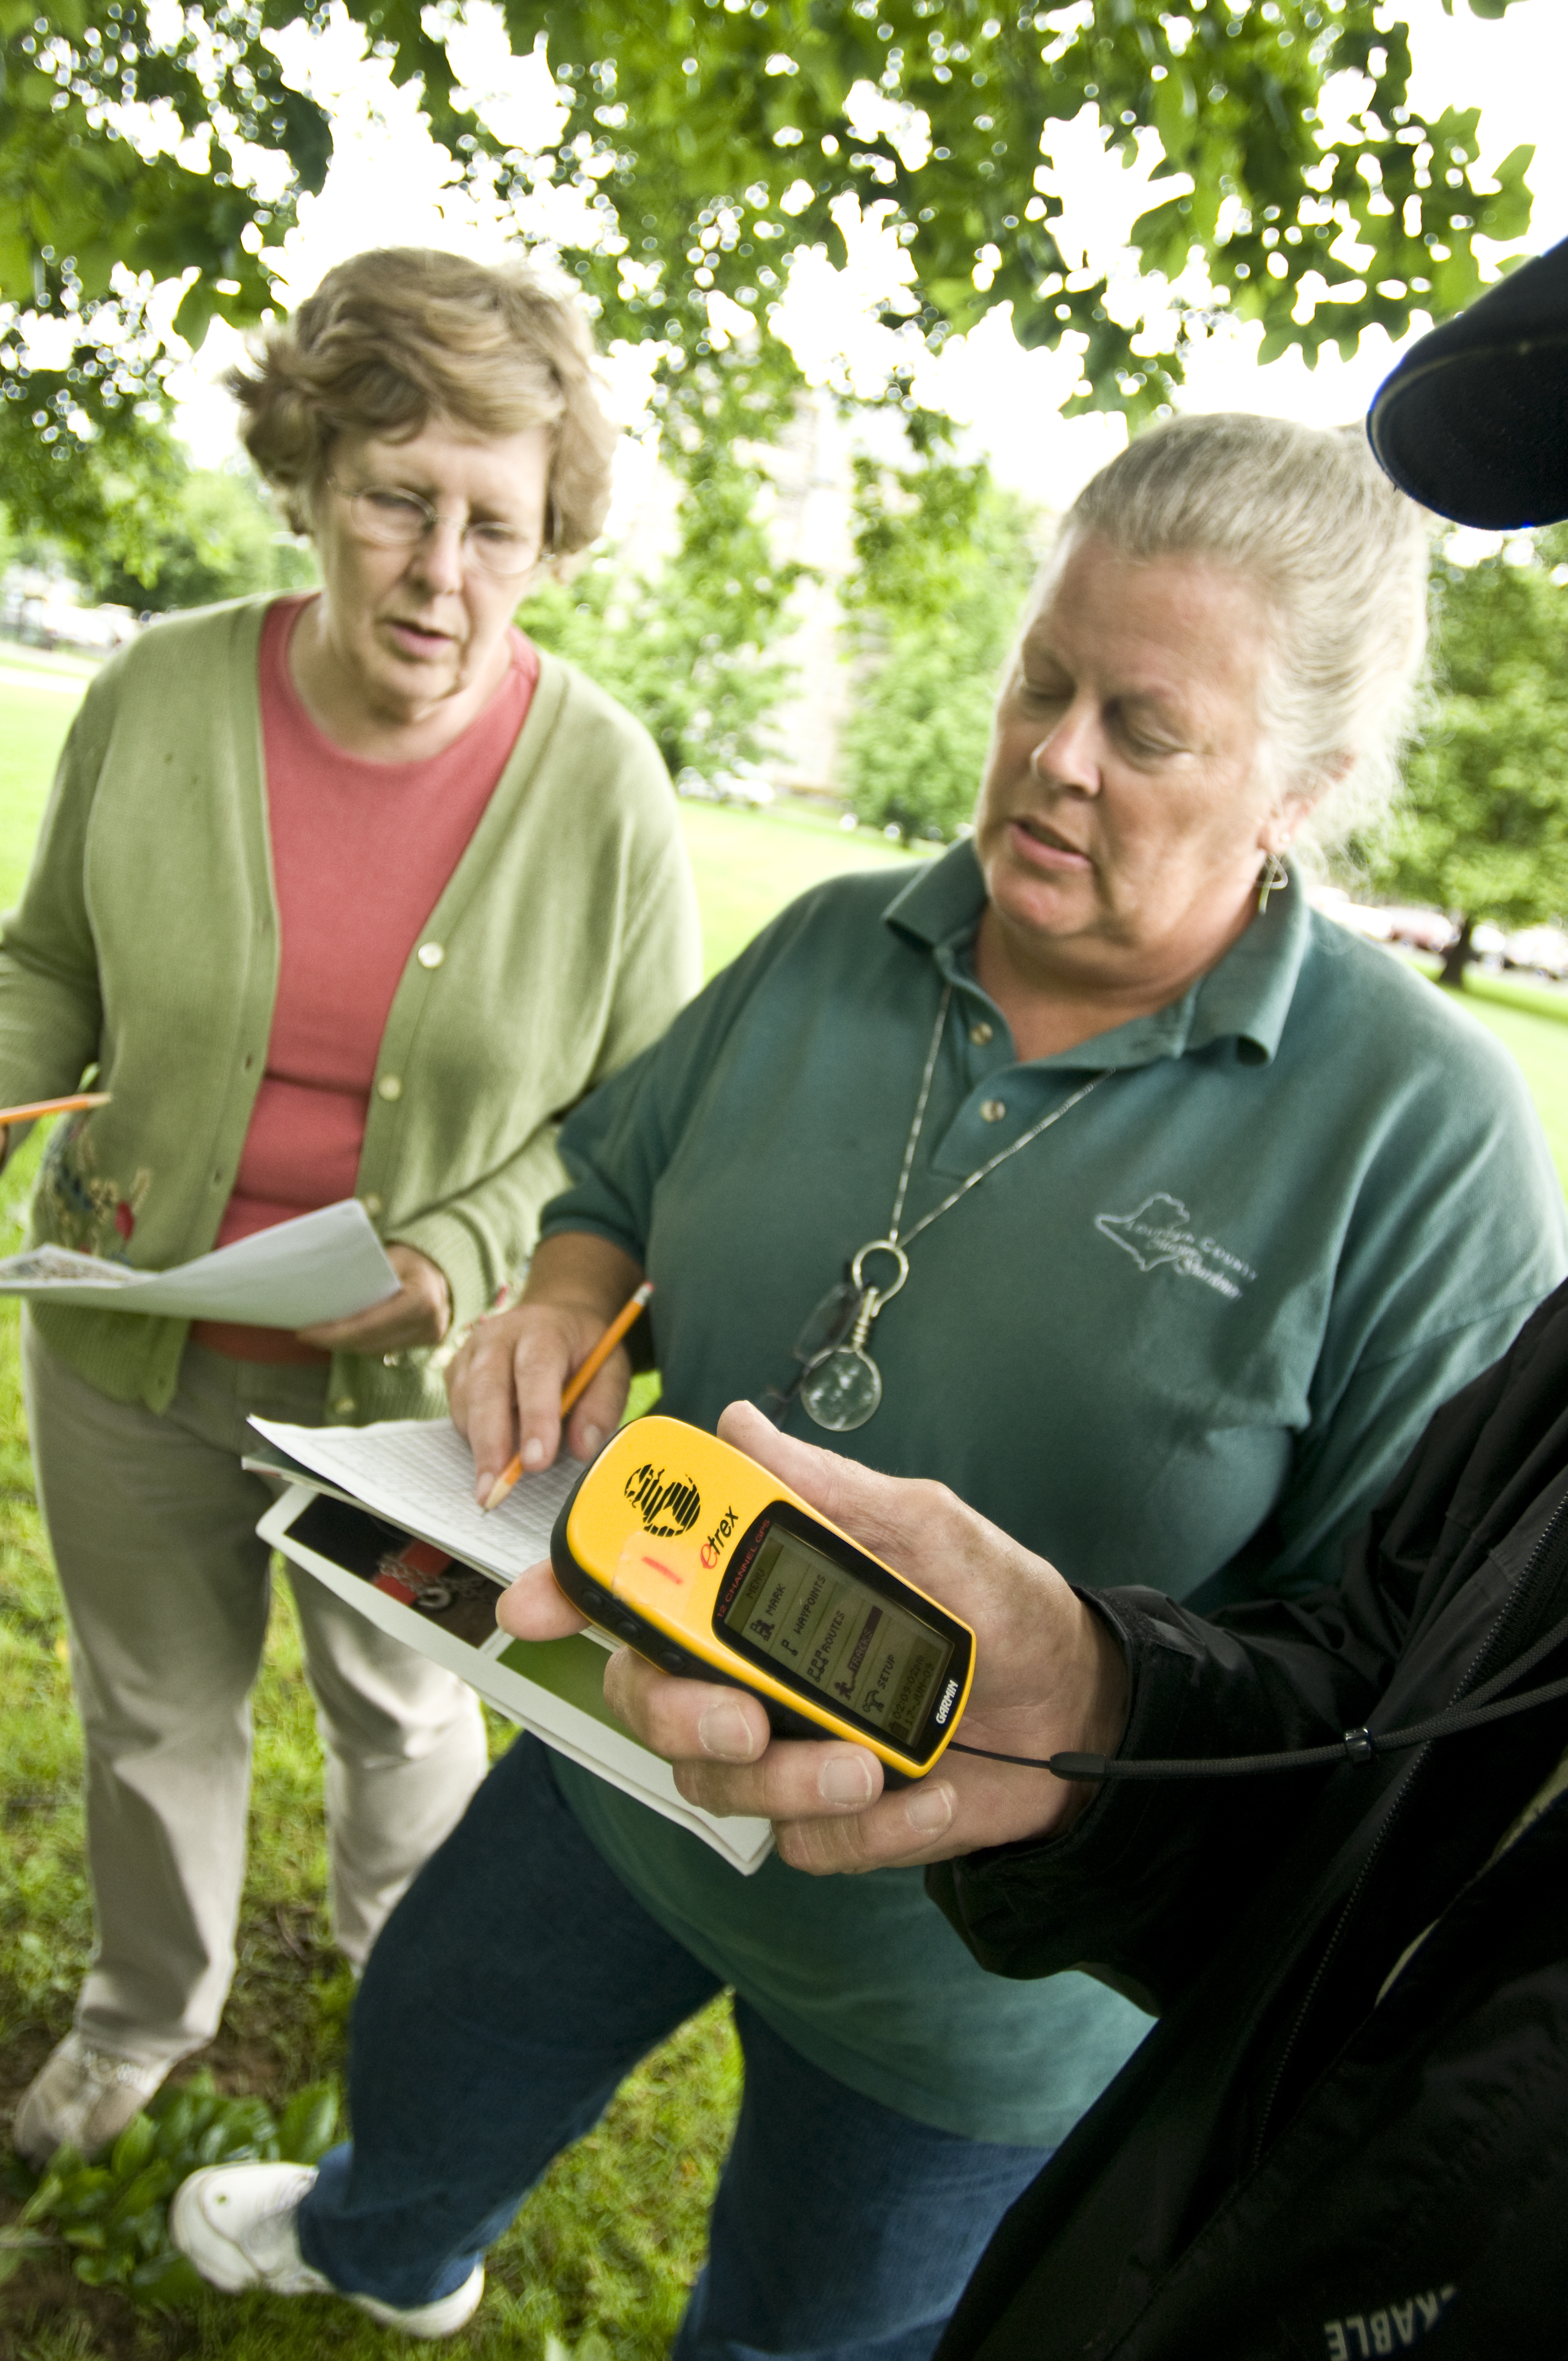 Three people standing under a tree. Two hold papers and one holds a small GPS unit.